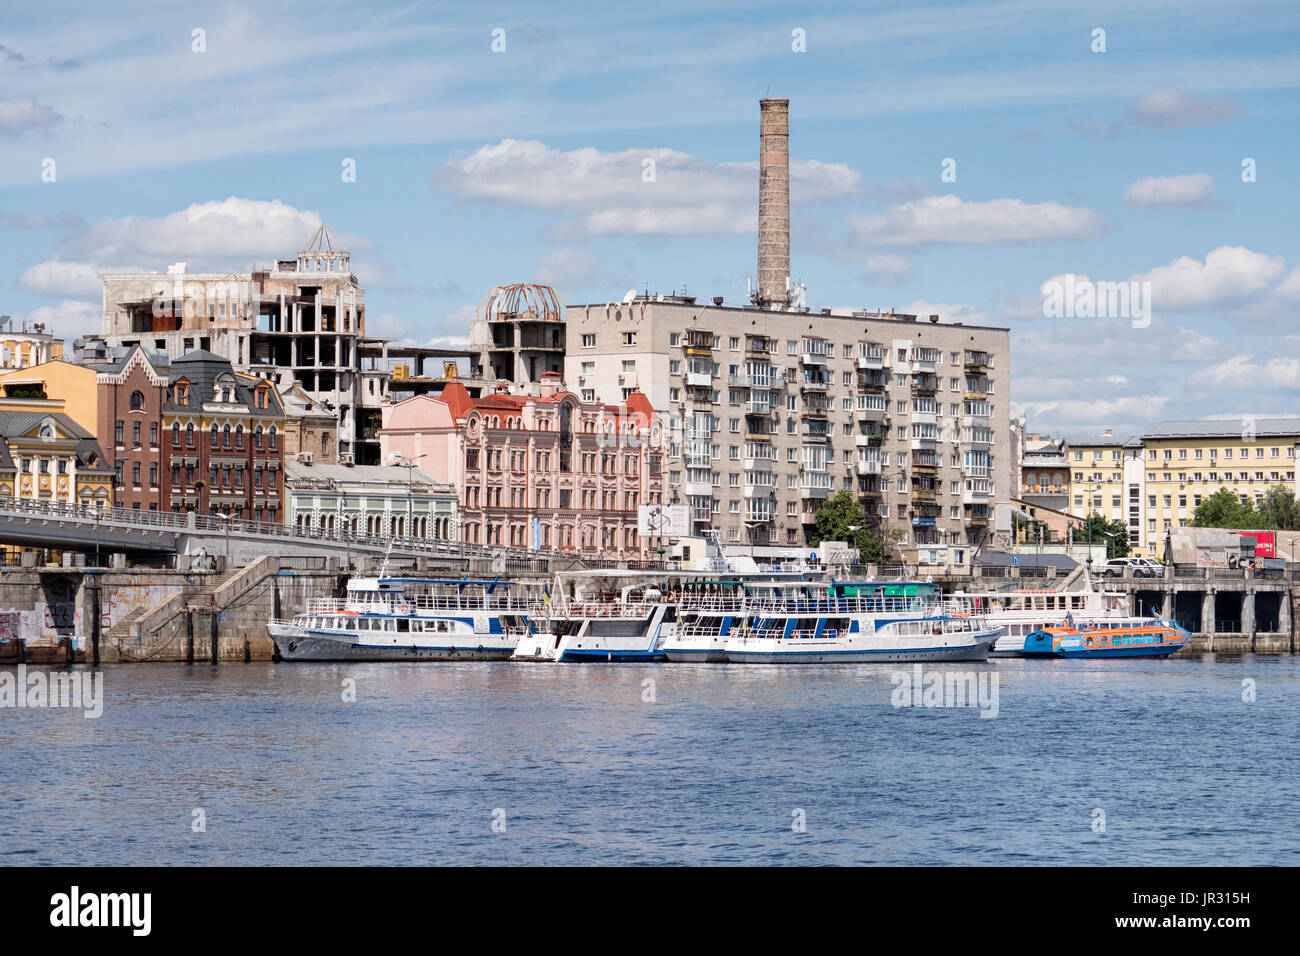 KYIV, UKRAINE - JUNE 12, 2016:  Tourist Boats in the Kiev River Port on the Dnieper (Dnipro) River in the Podil District Stock Photo